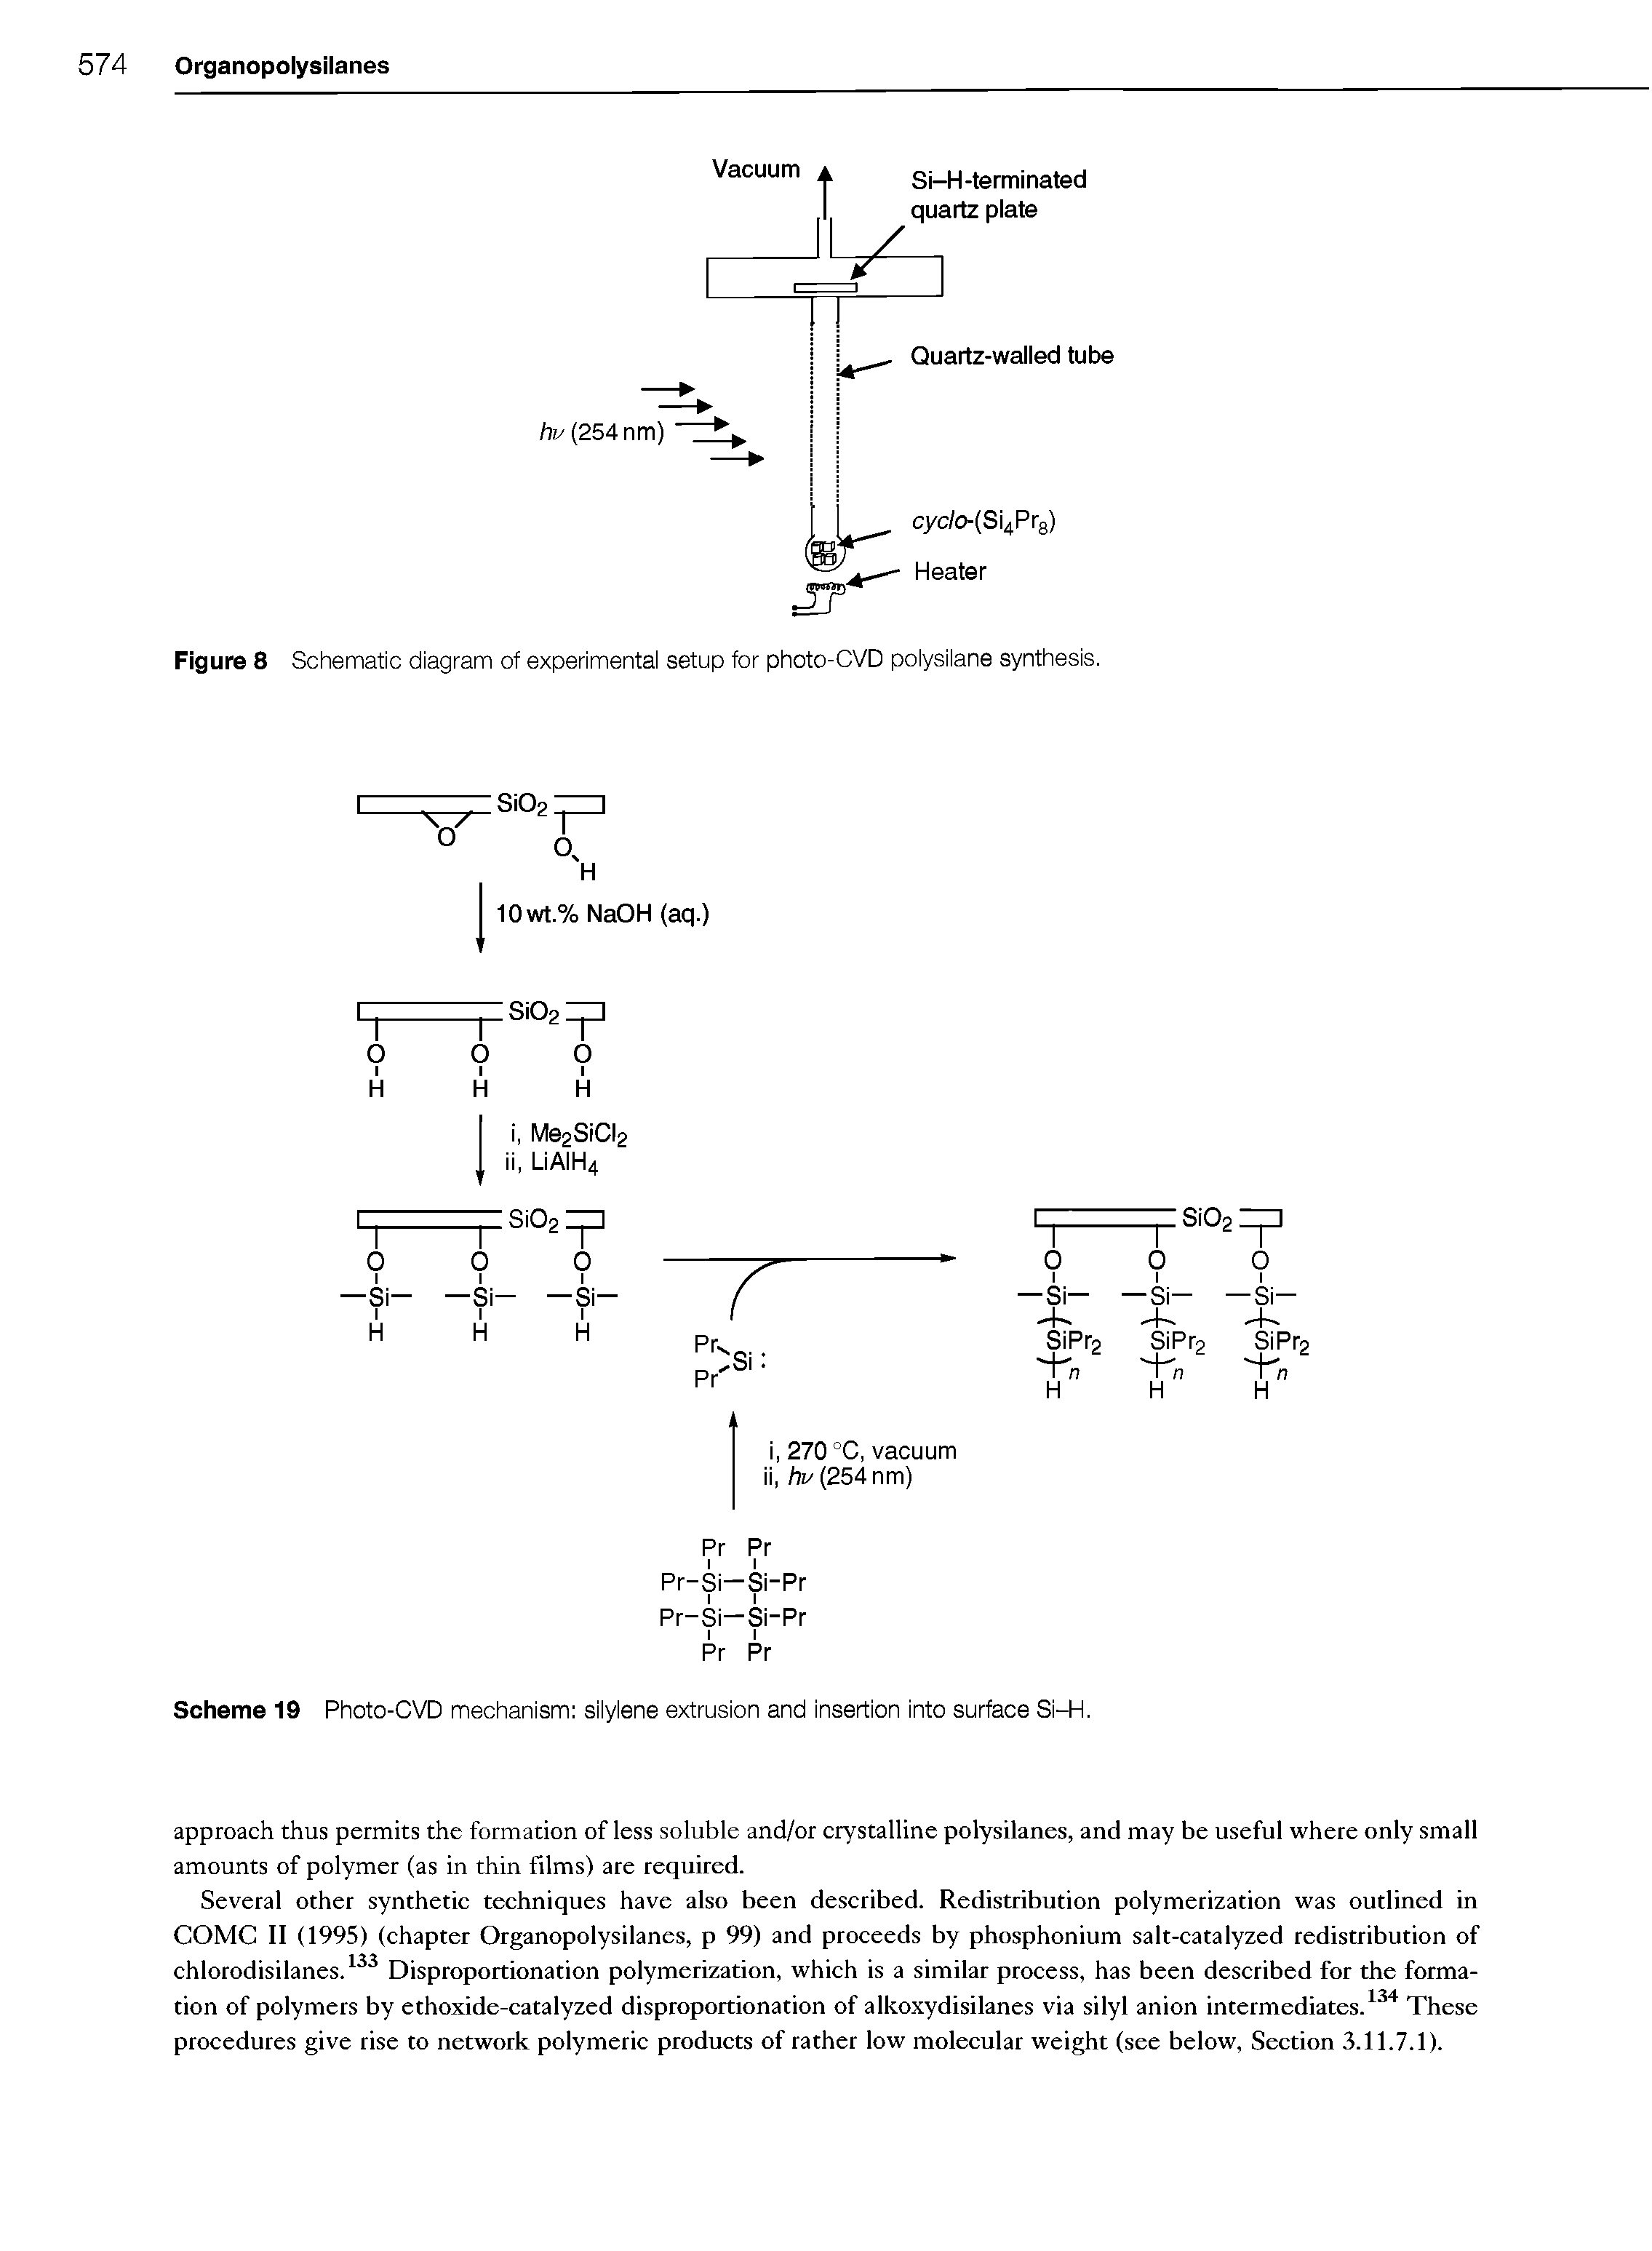 Scheme 19 Photo-CVD mechanism silylene extrusion and insertion into surface Si-H.